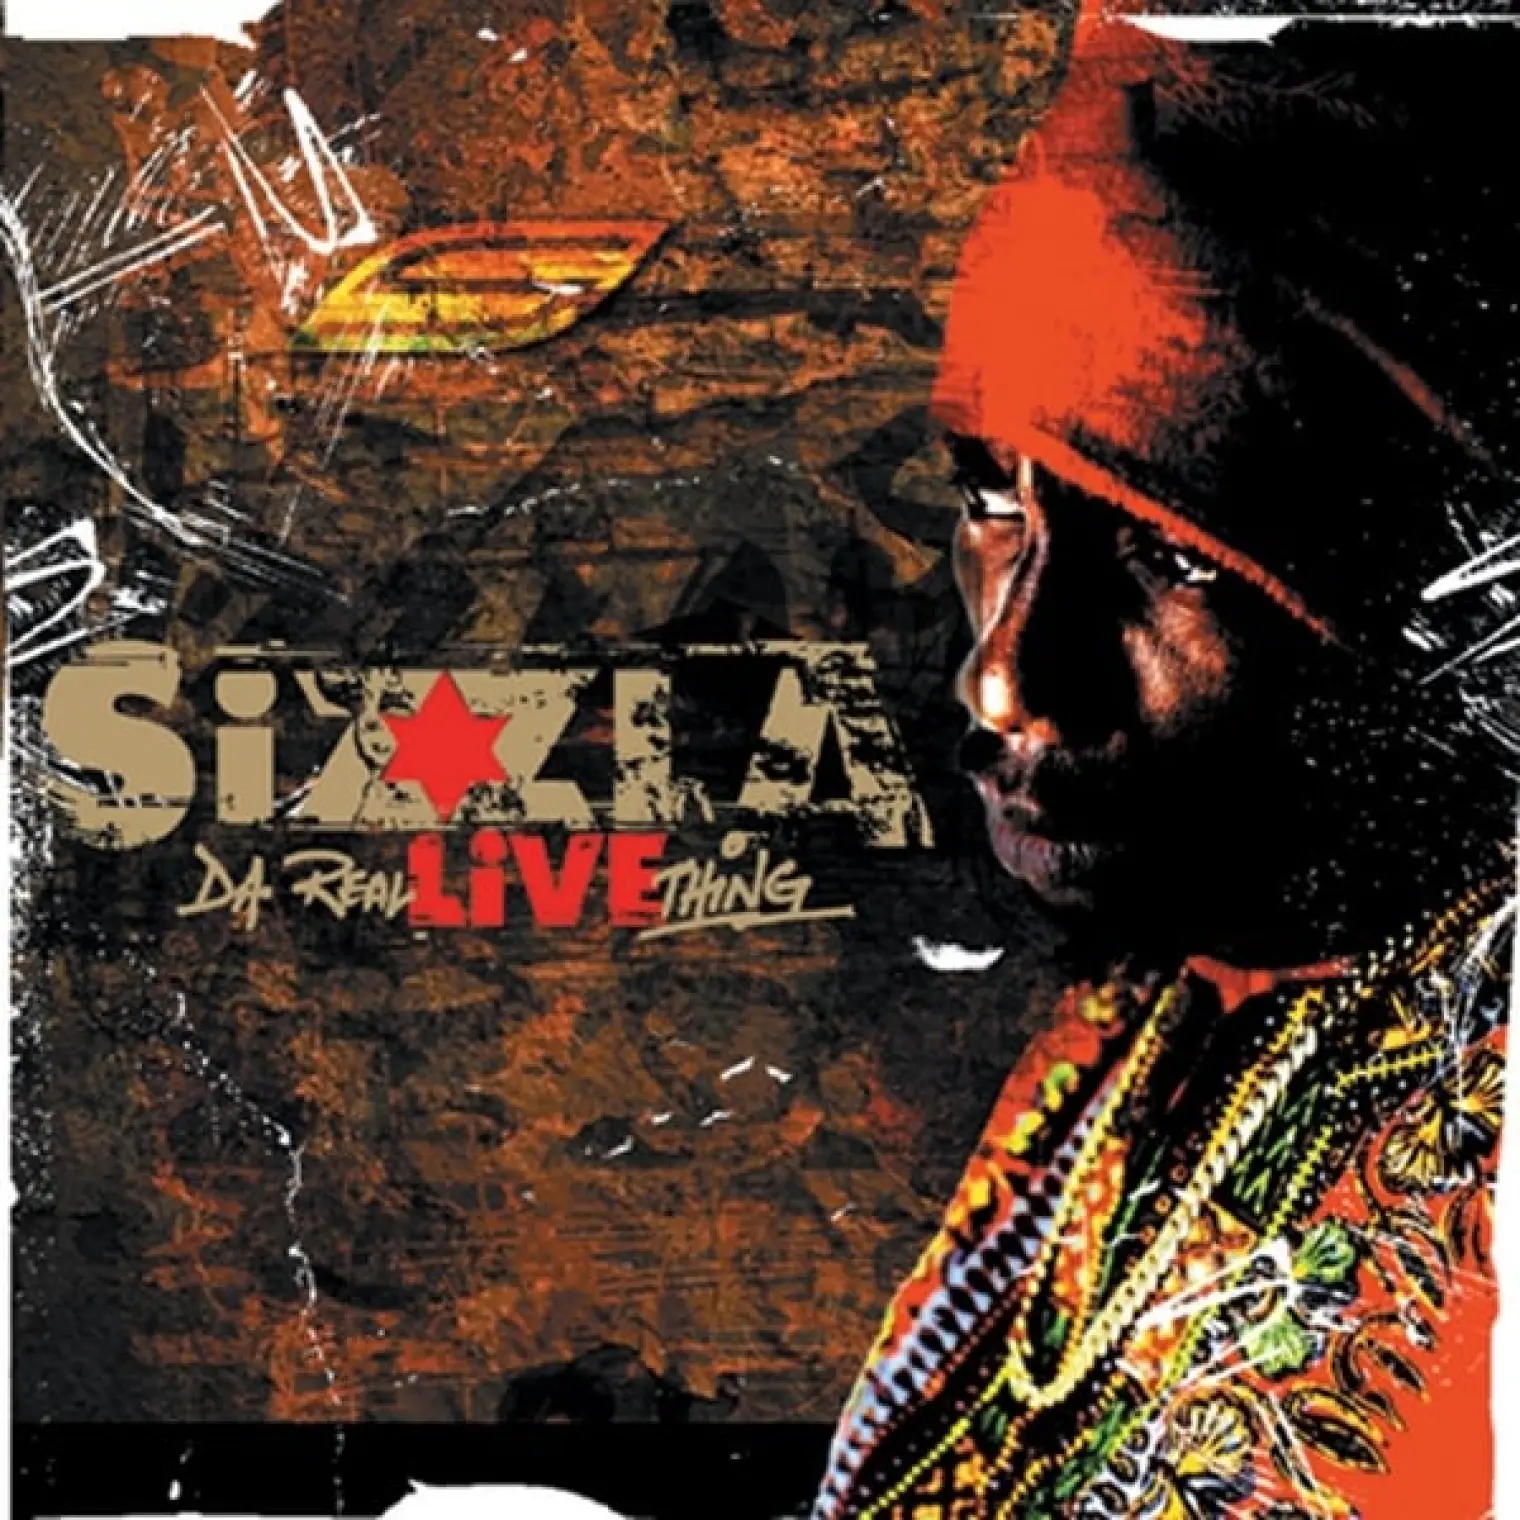 Da Real Live Thing -  Sizzla 